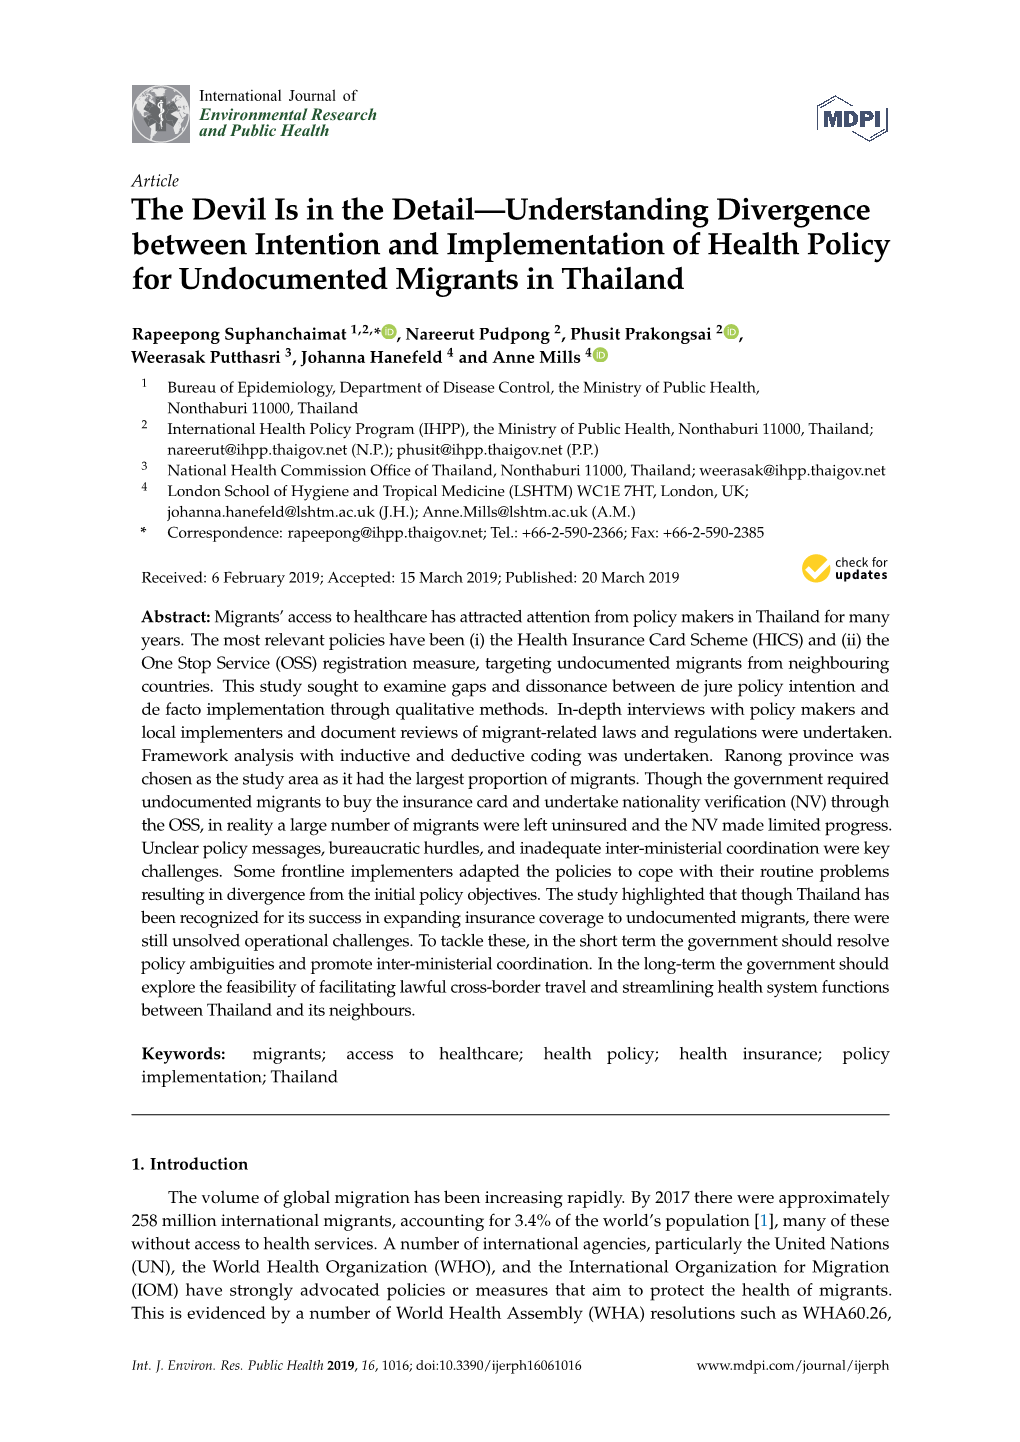 The Devil Is in the Detail—Understanding Divergence Between Intention and Implementation of Health Policy for Undocumented Migrants in Thailand